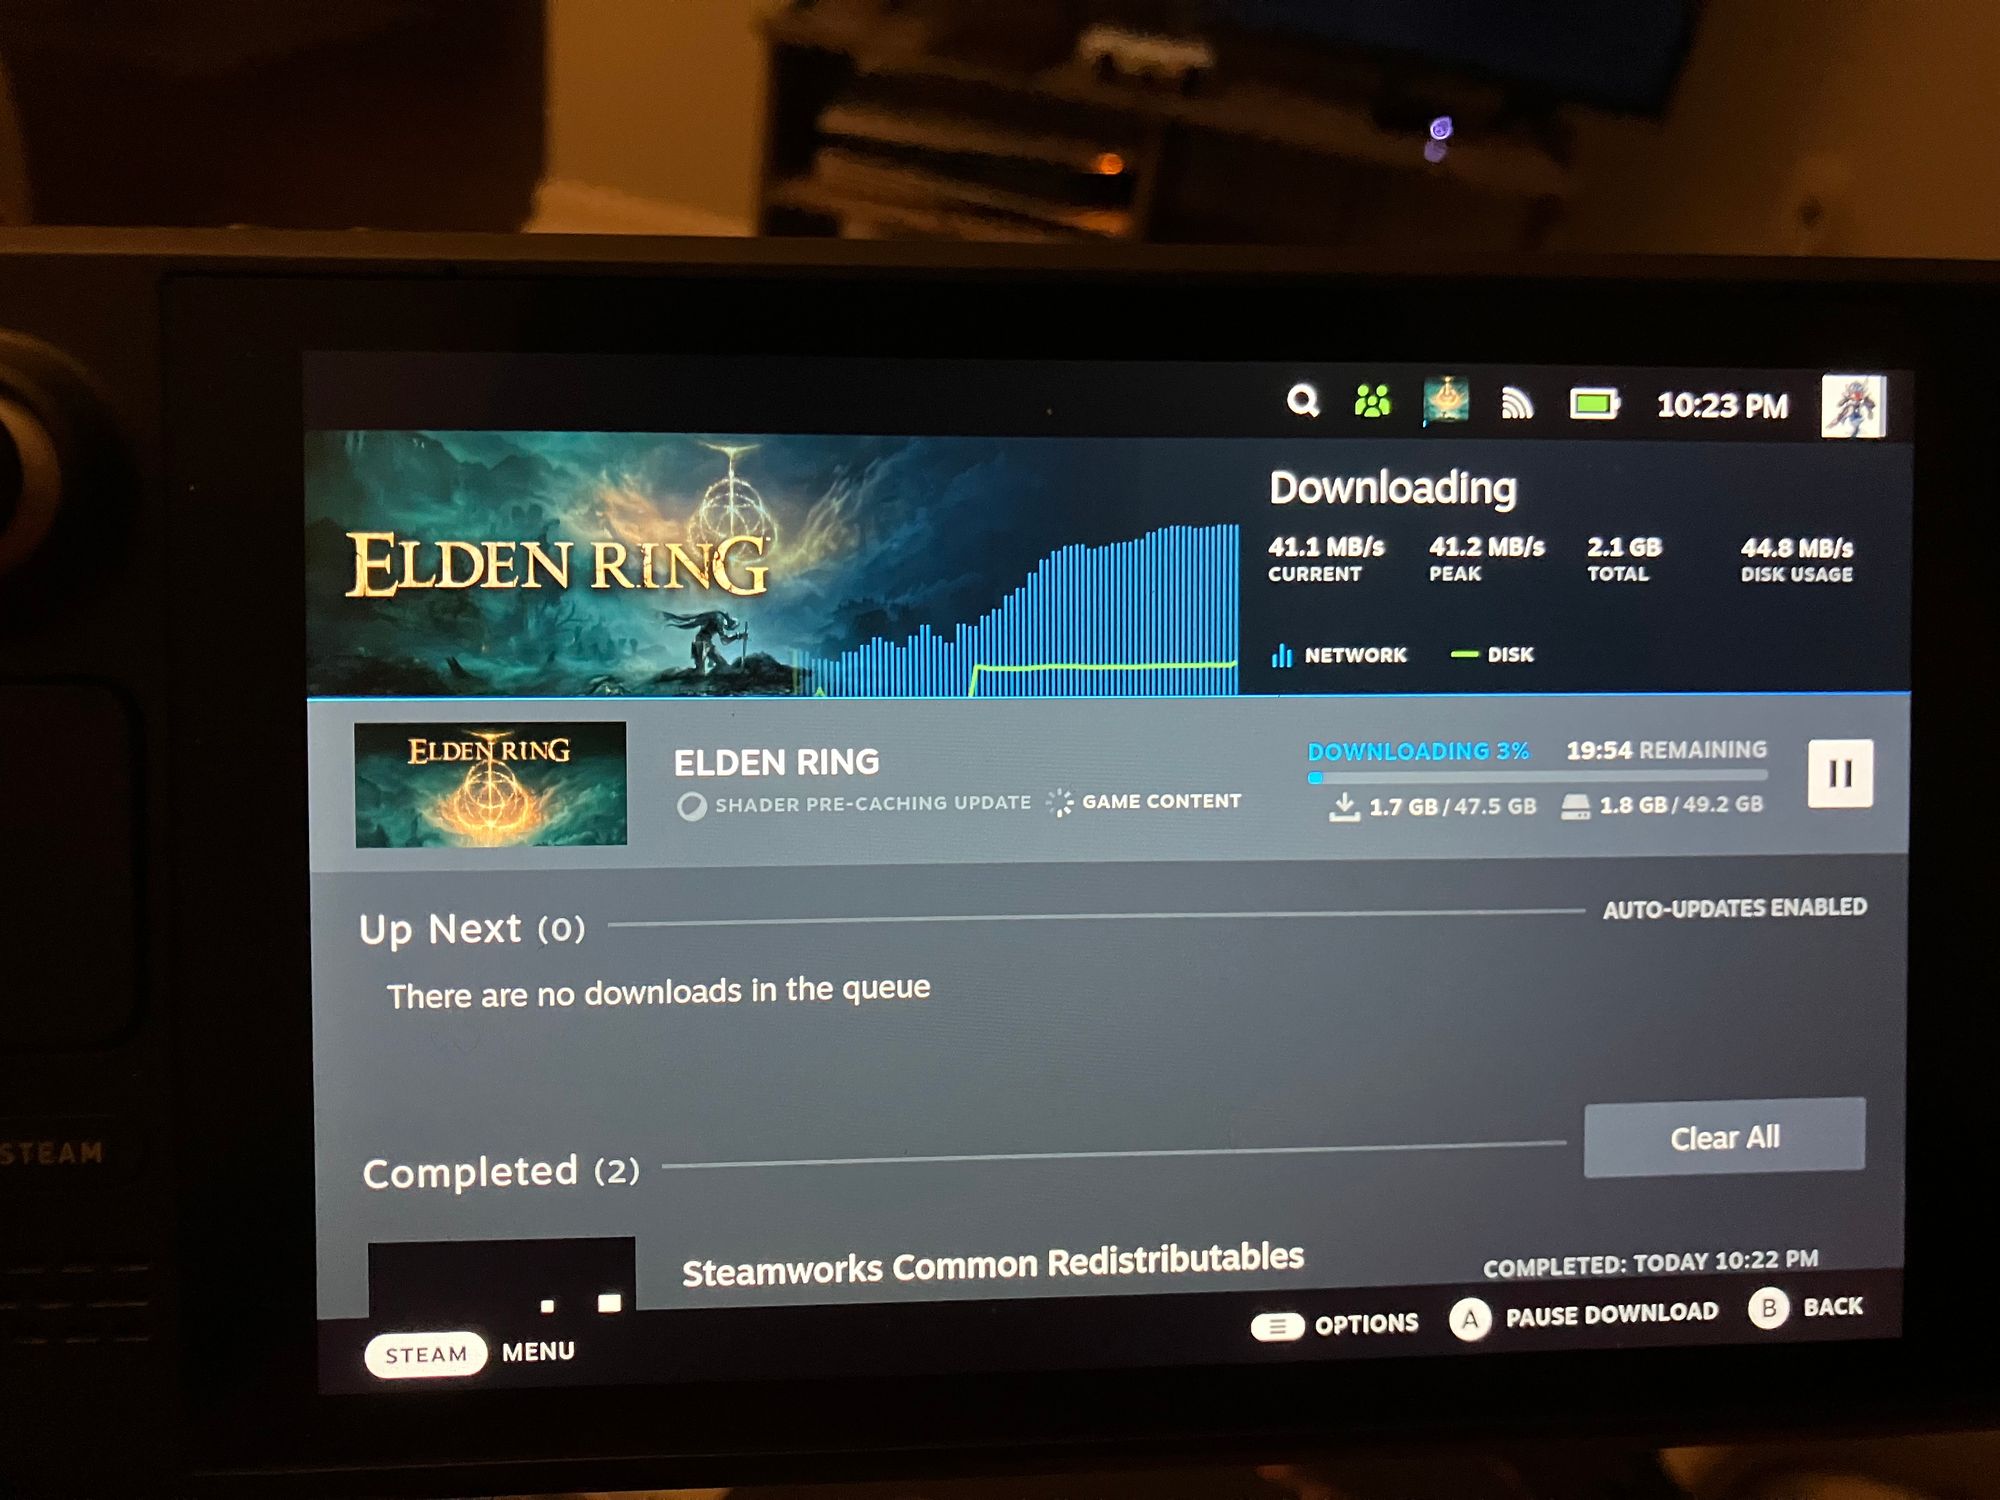 The download screen showing the speeds at which it's downloading Elden ring on Wi-fi. 